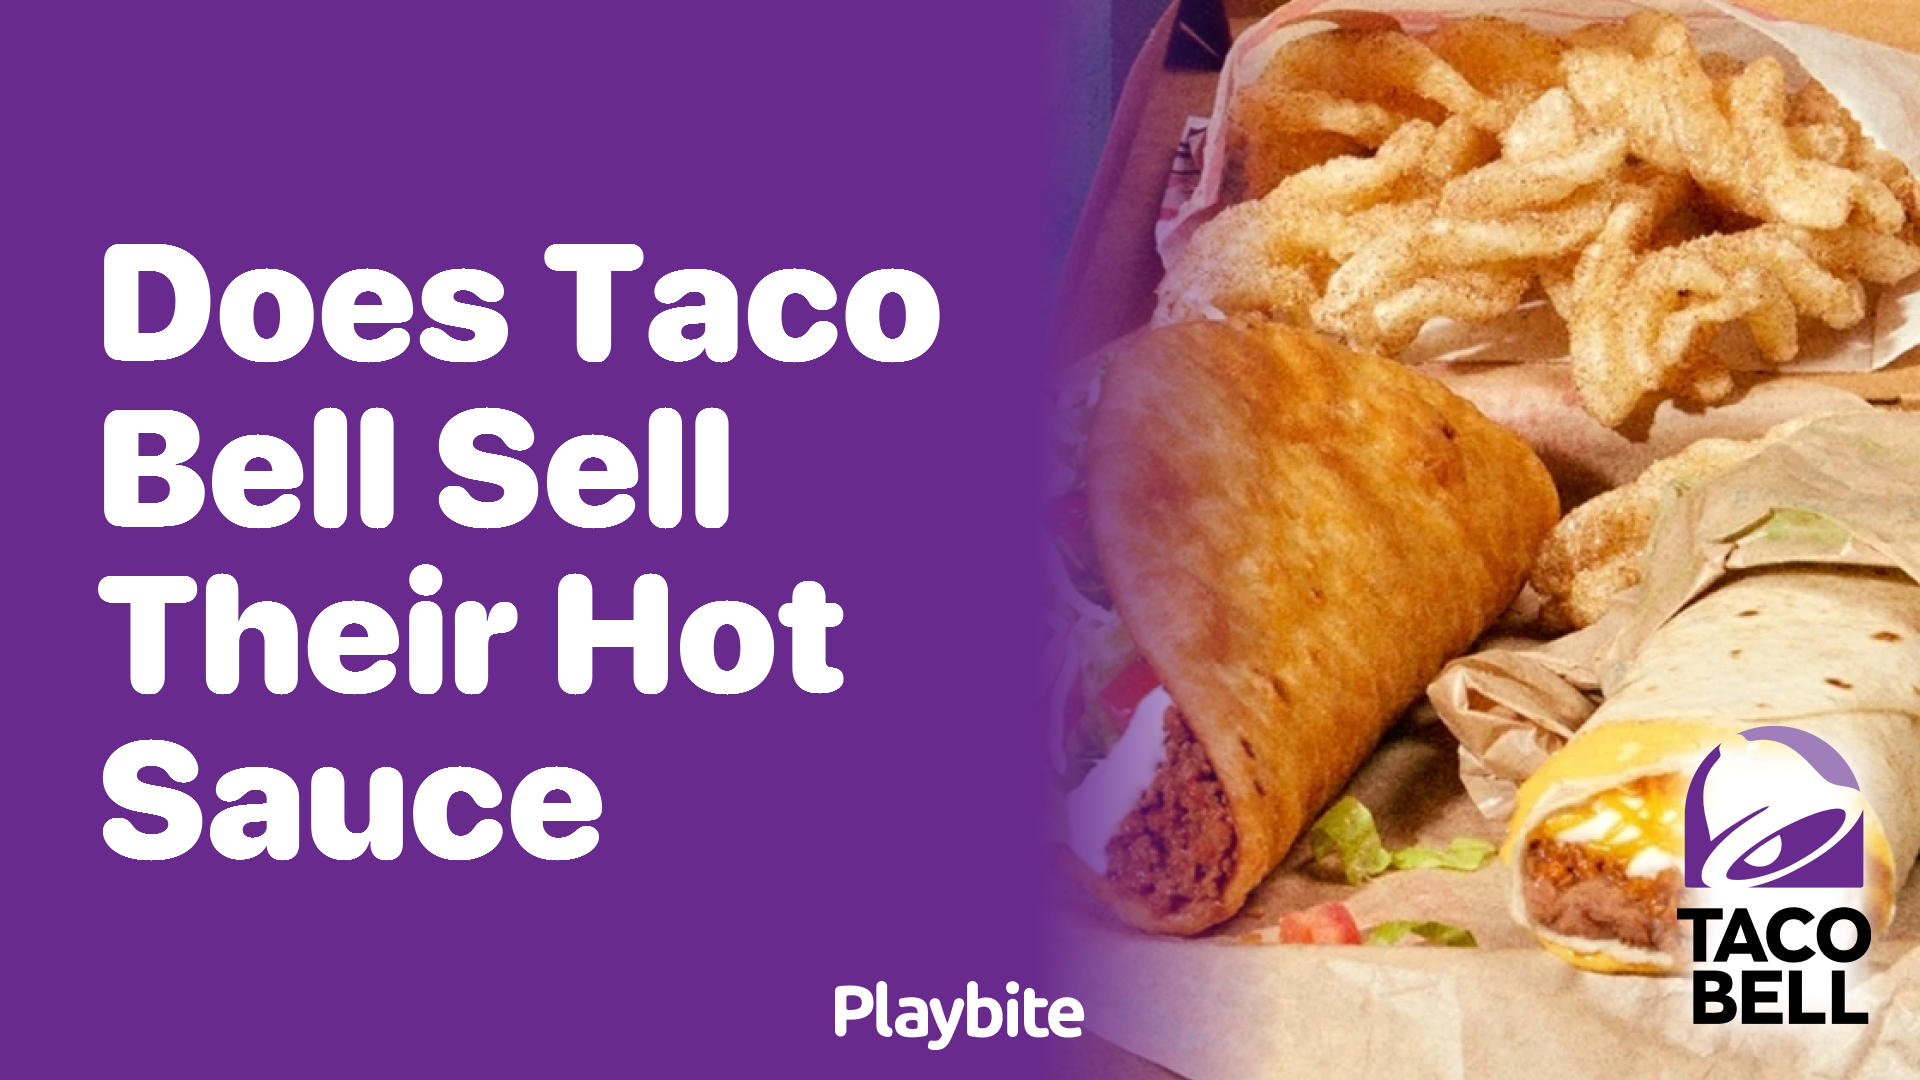 Does Taco Bell Sell Their Hot Sauce?